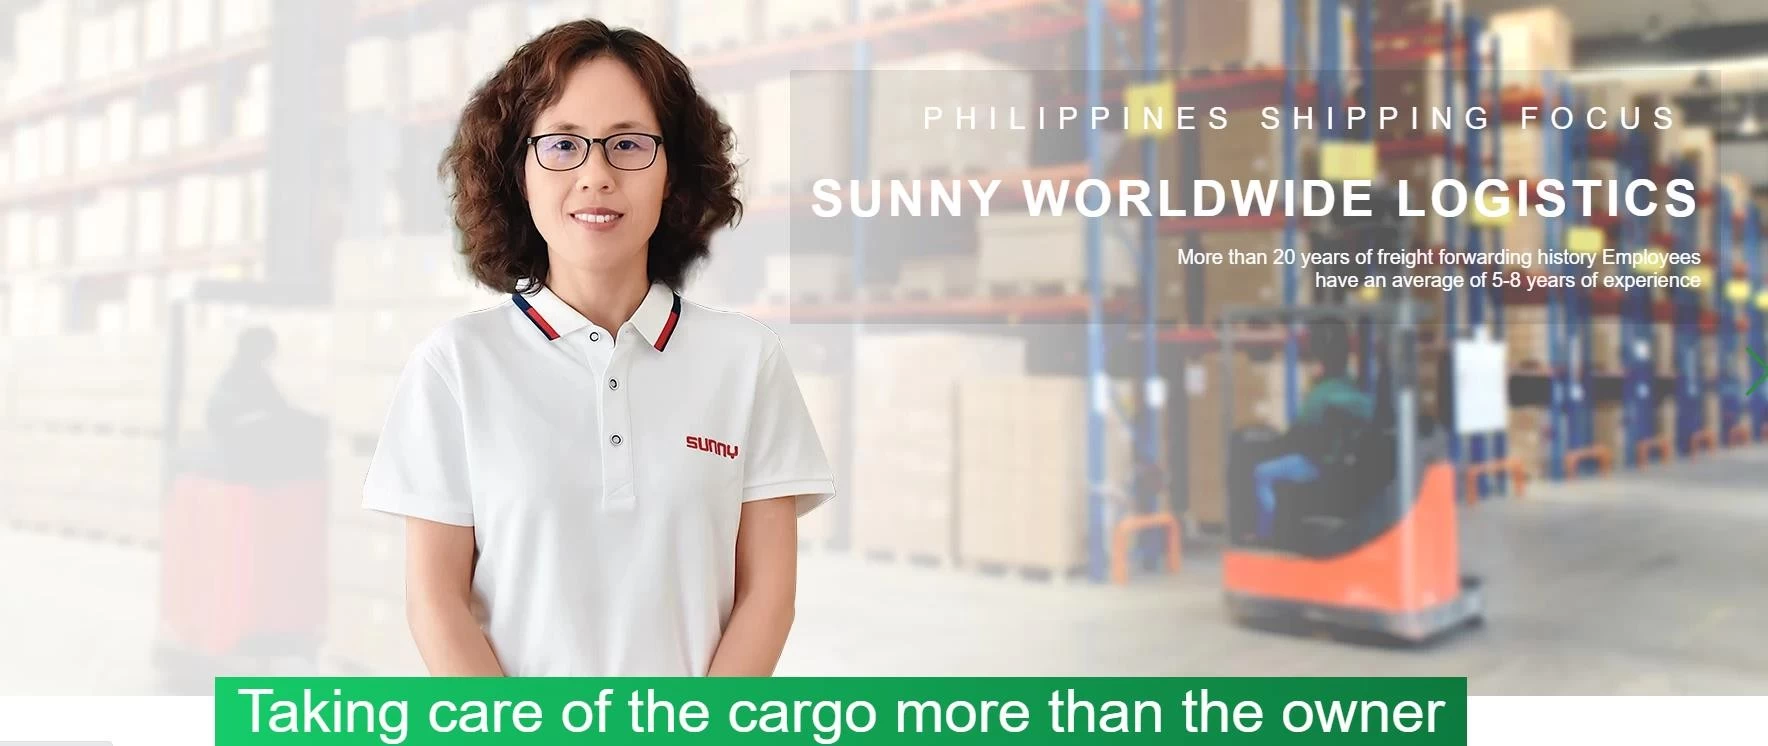 Sunny Worldwide Logistics' air freight service: real-time 